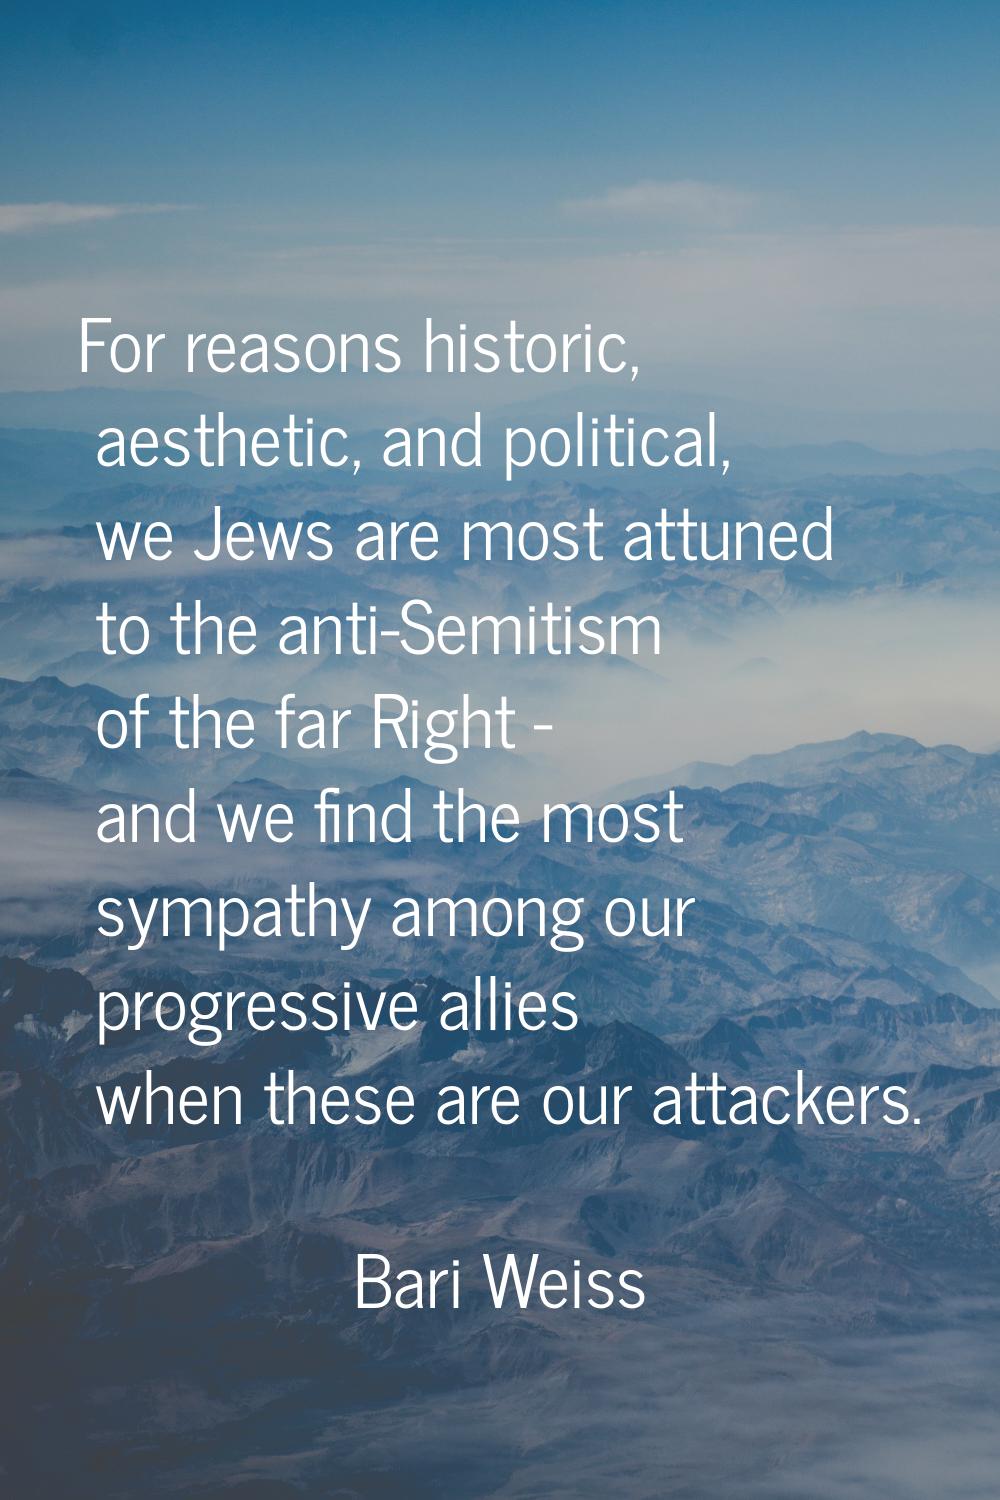 For reasons historic, aesthetic, and political, we Jews are most attuned to the anti-Semitism of th